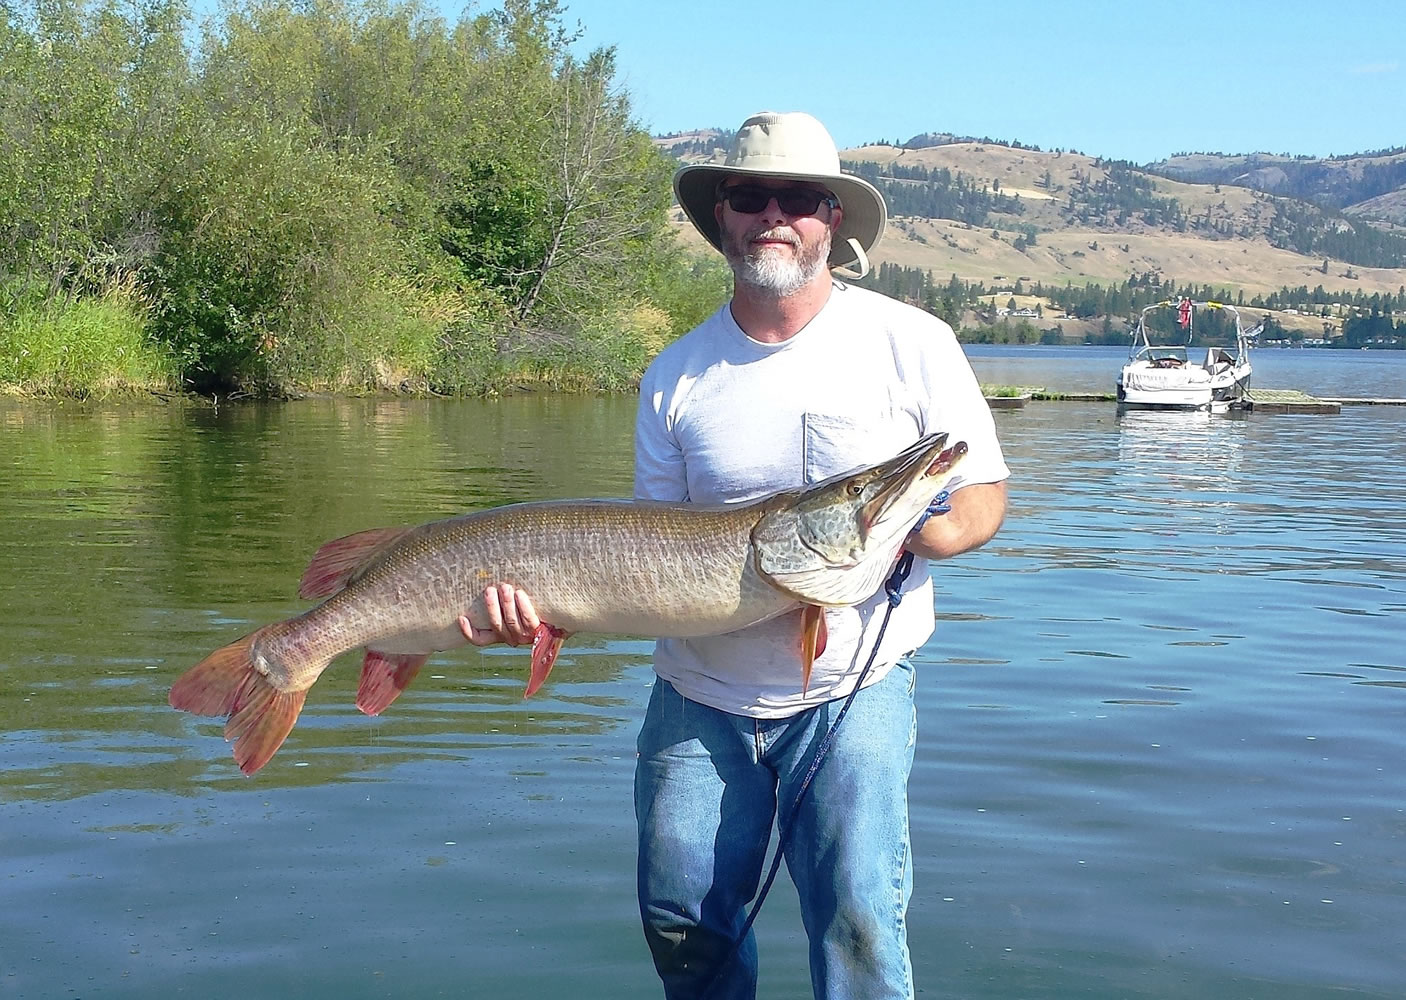 Tiger muskies rule at Curlew Lake - The Columbian